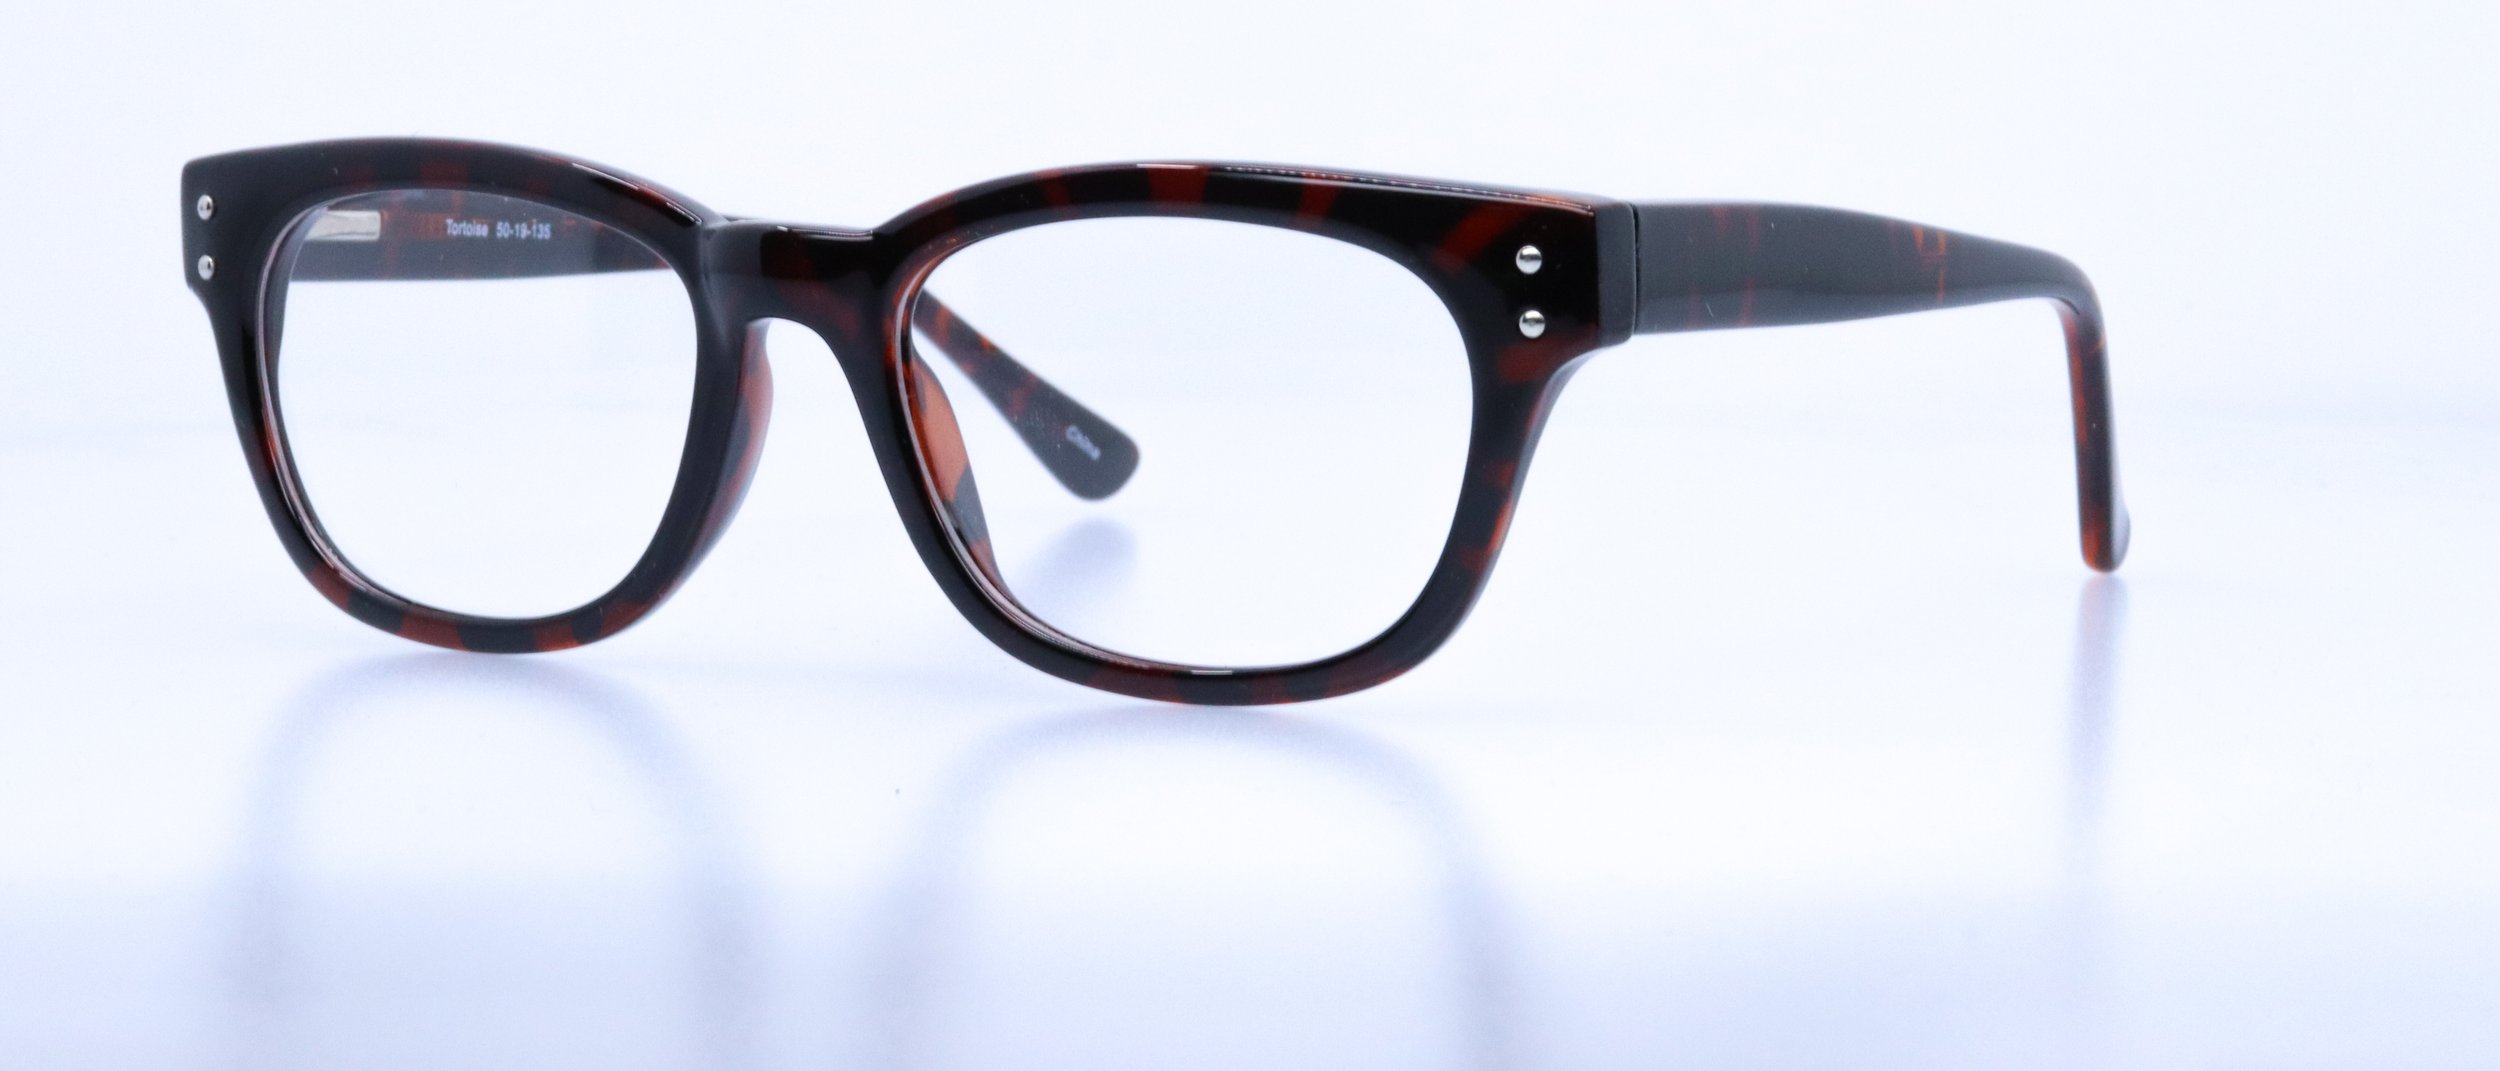  Pound: 50-19-135, Available in Black Cherry, Black, or Tortoise 